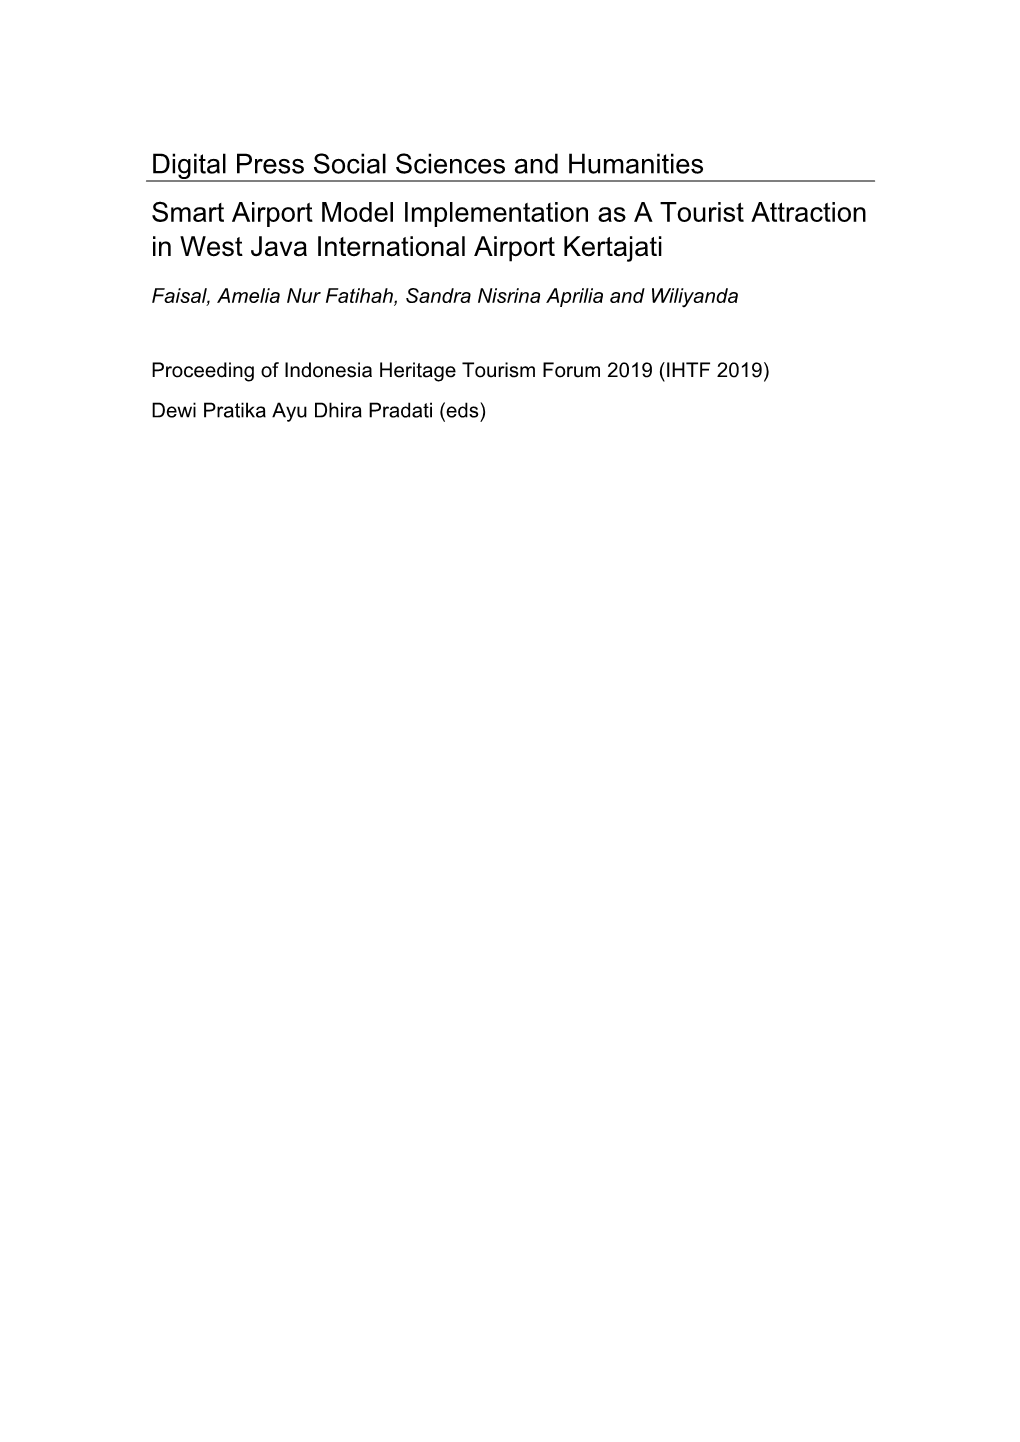 Smart Airport Model Implementation As a Tourist Attraction in West Java International Airport Kertajati